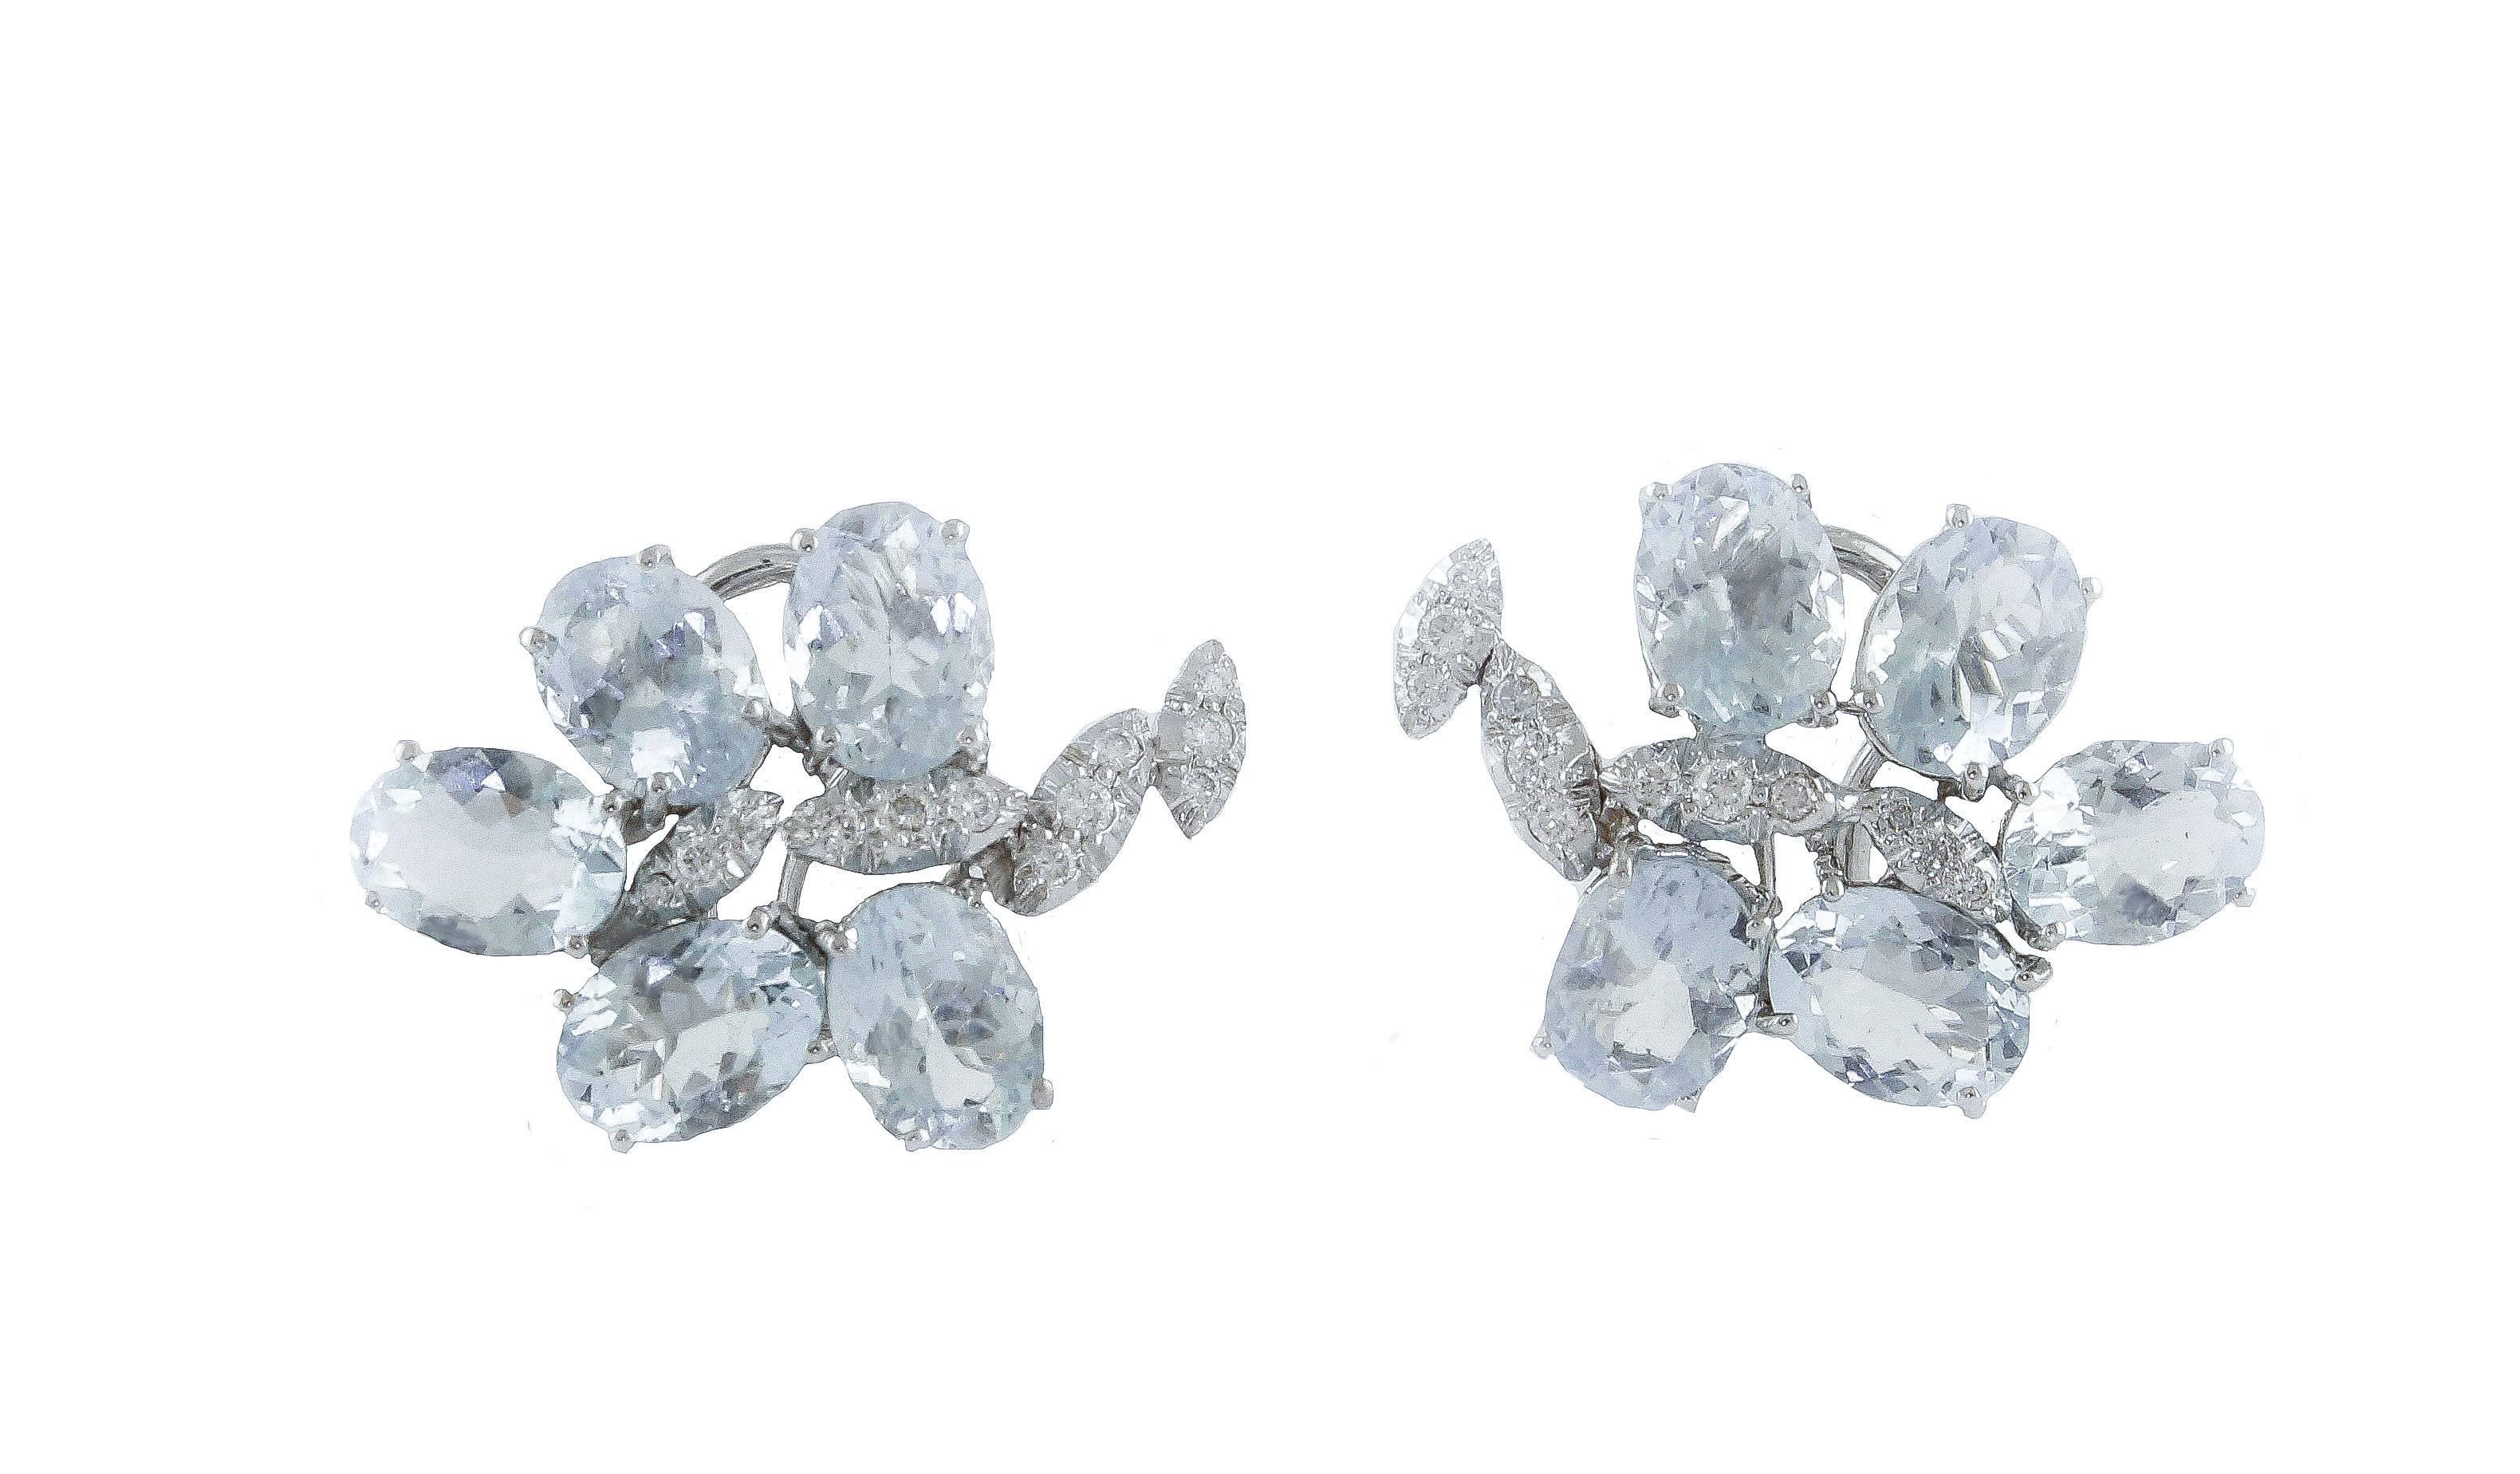 Fabulous earrings, in kt14 white gold, embellished with beautiful aquamarine stones from ct 11.33, and diamonds from ct 0.38. Total weight g 8.10
Diamonds ct 0.38
Aquamarine ct 11.33
Total weight g 8.10
R.F + uuih

For any enquires, please contact